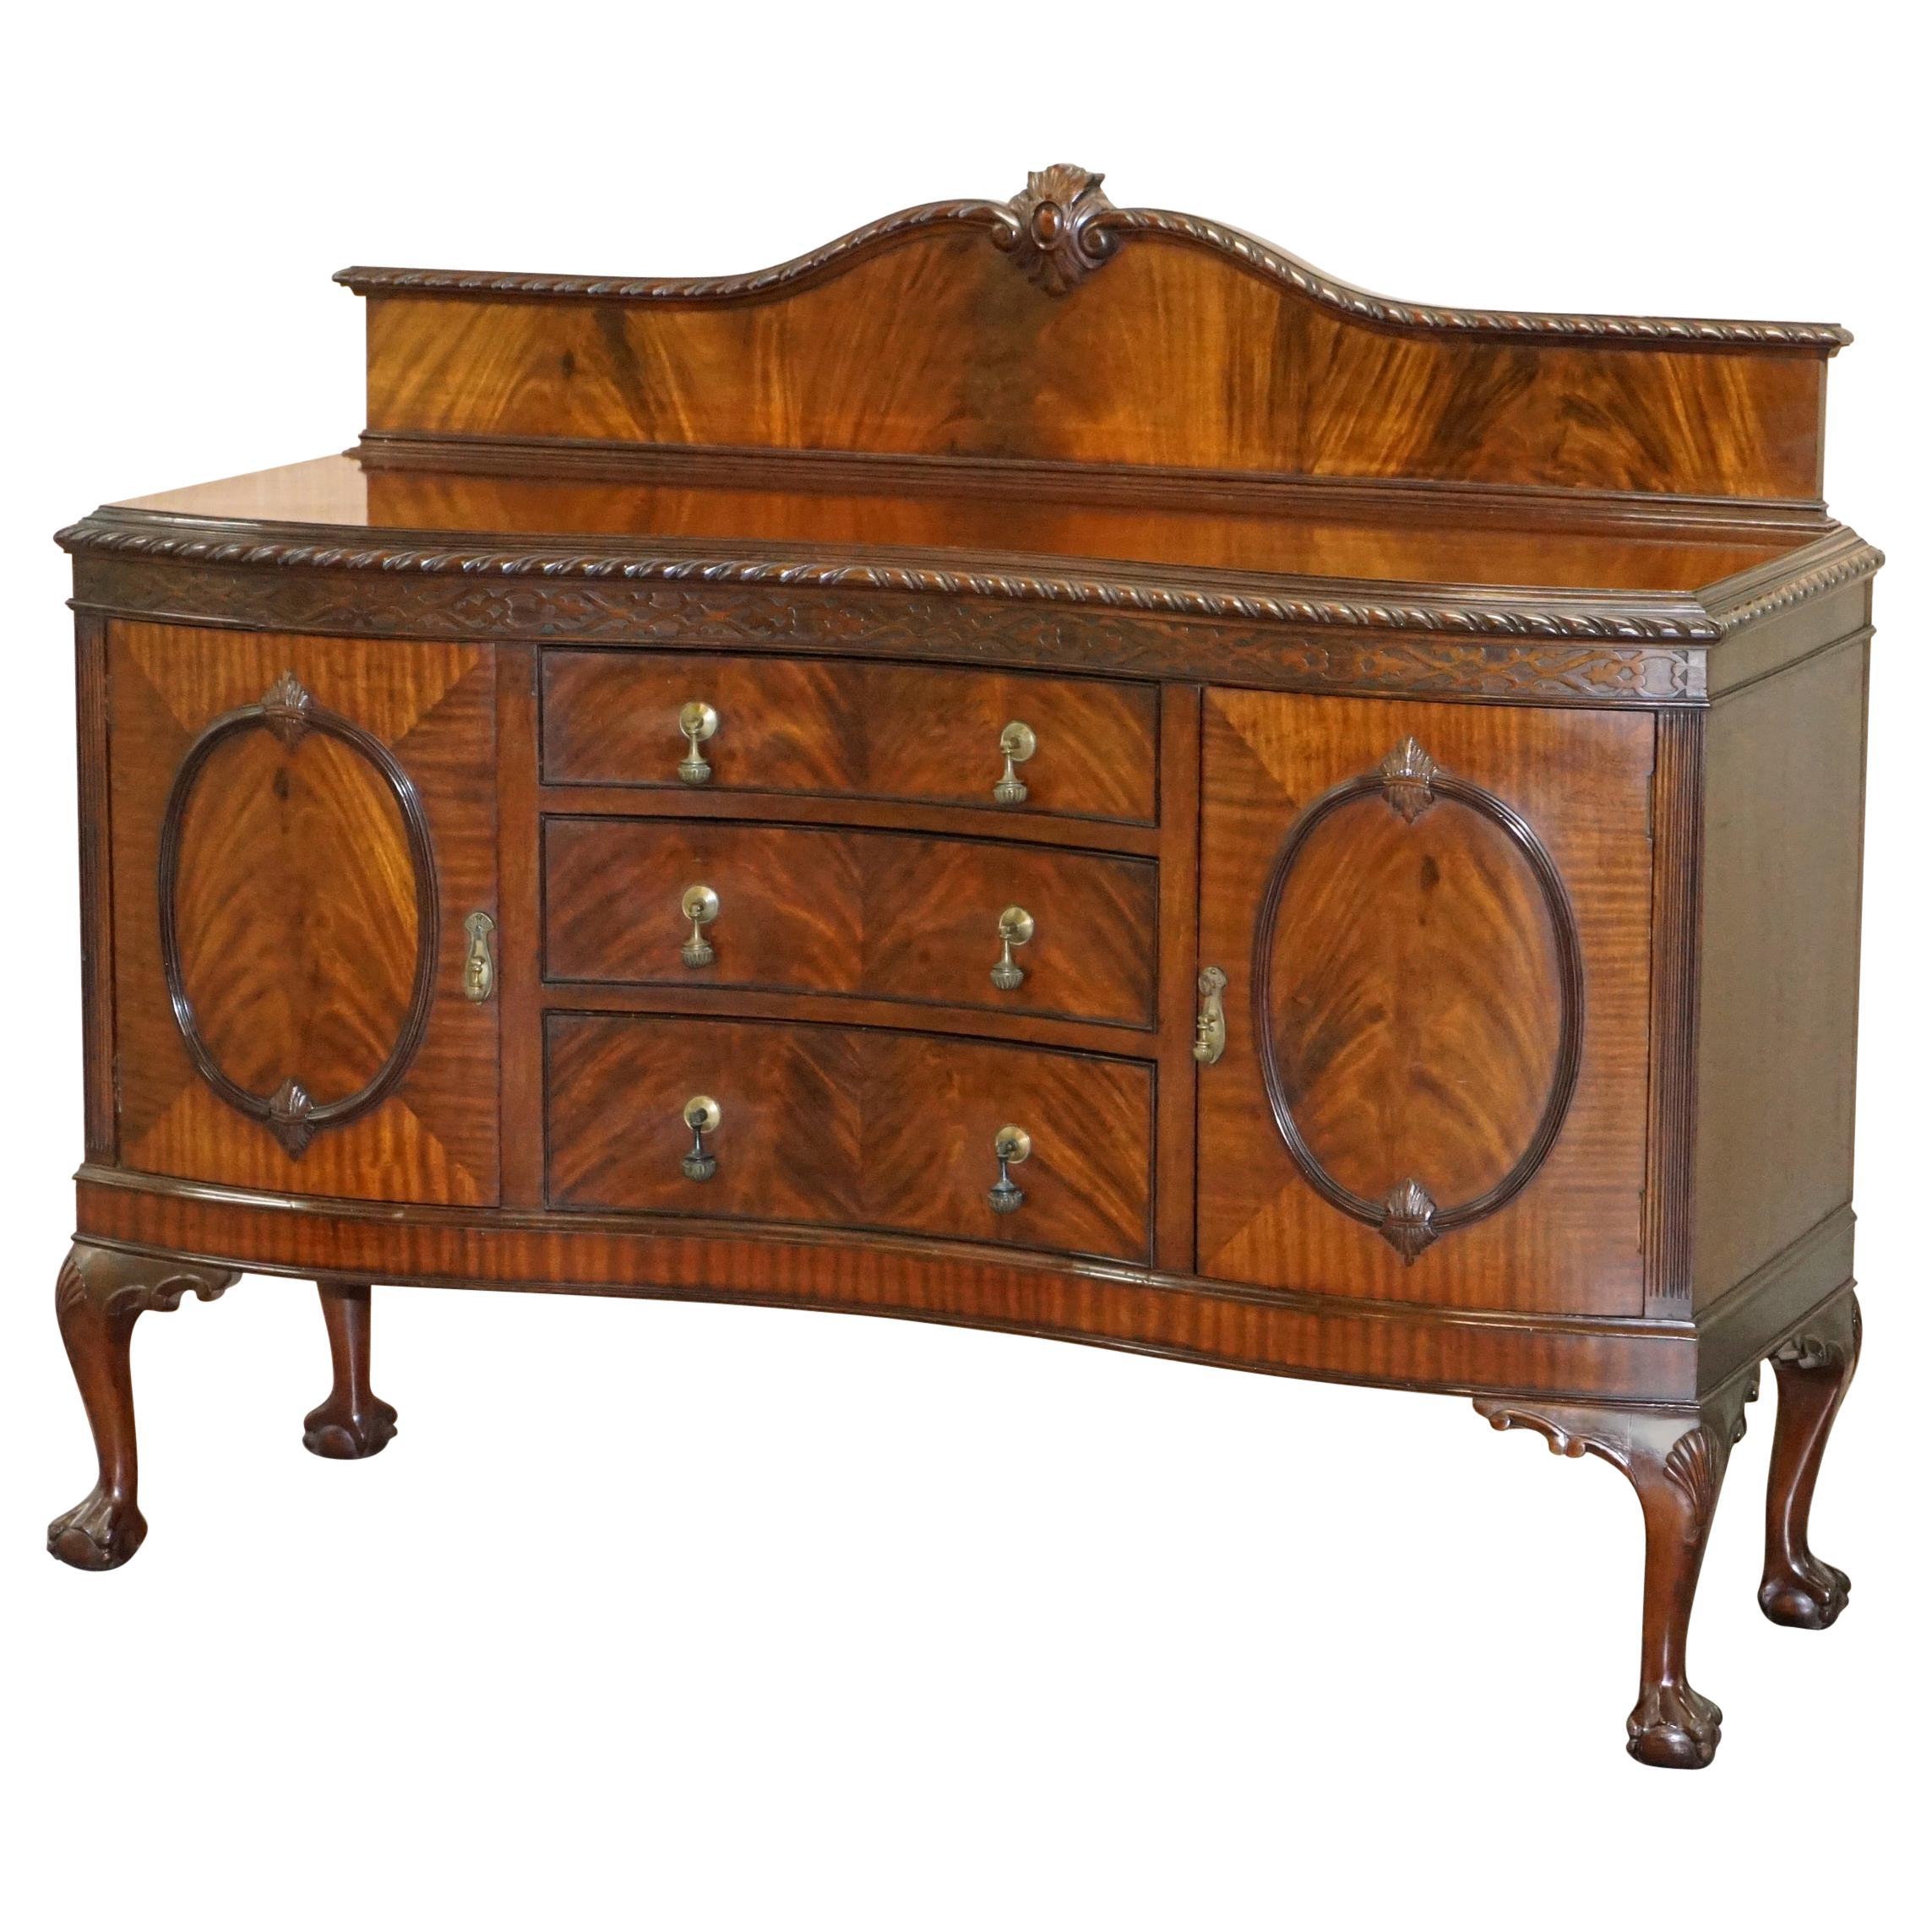 Claw & Ball Feet Flamed Mahogany Sideboard Drawers Chippendale Style, circa 1920